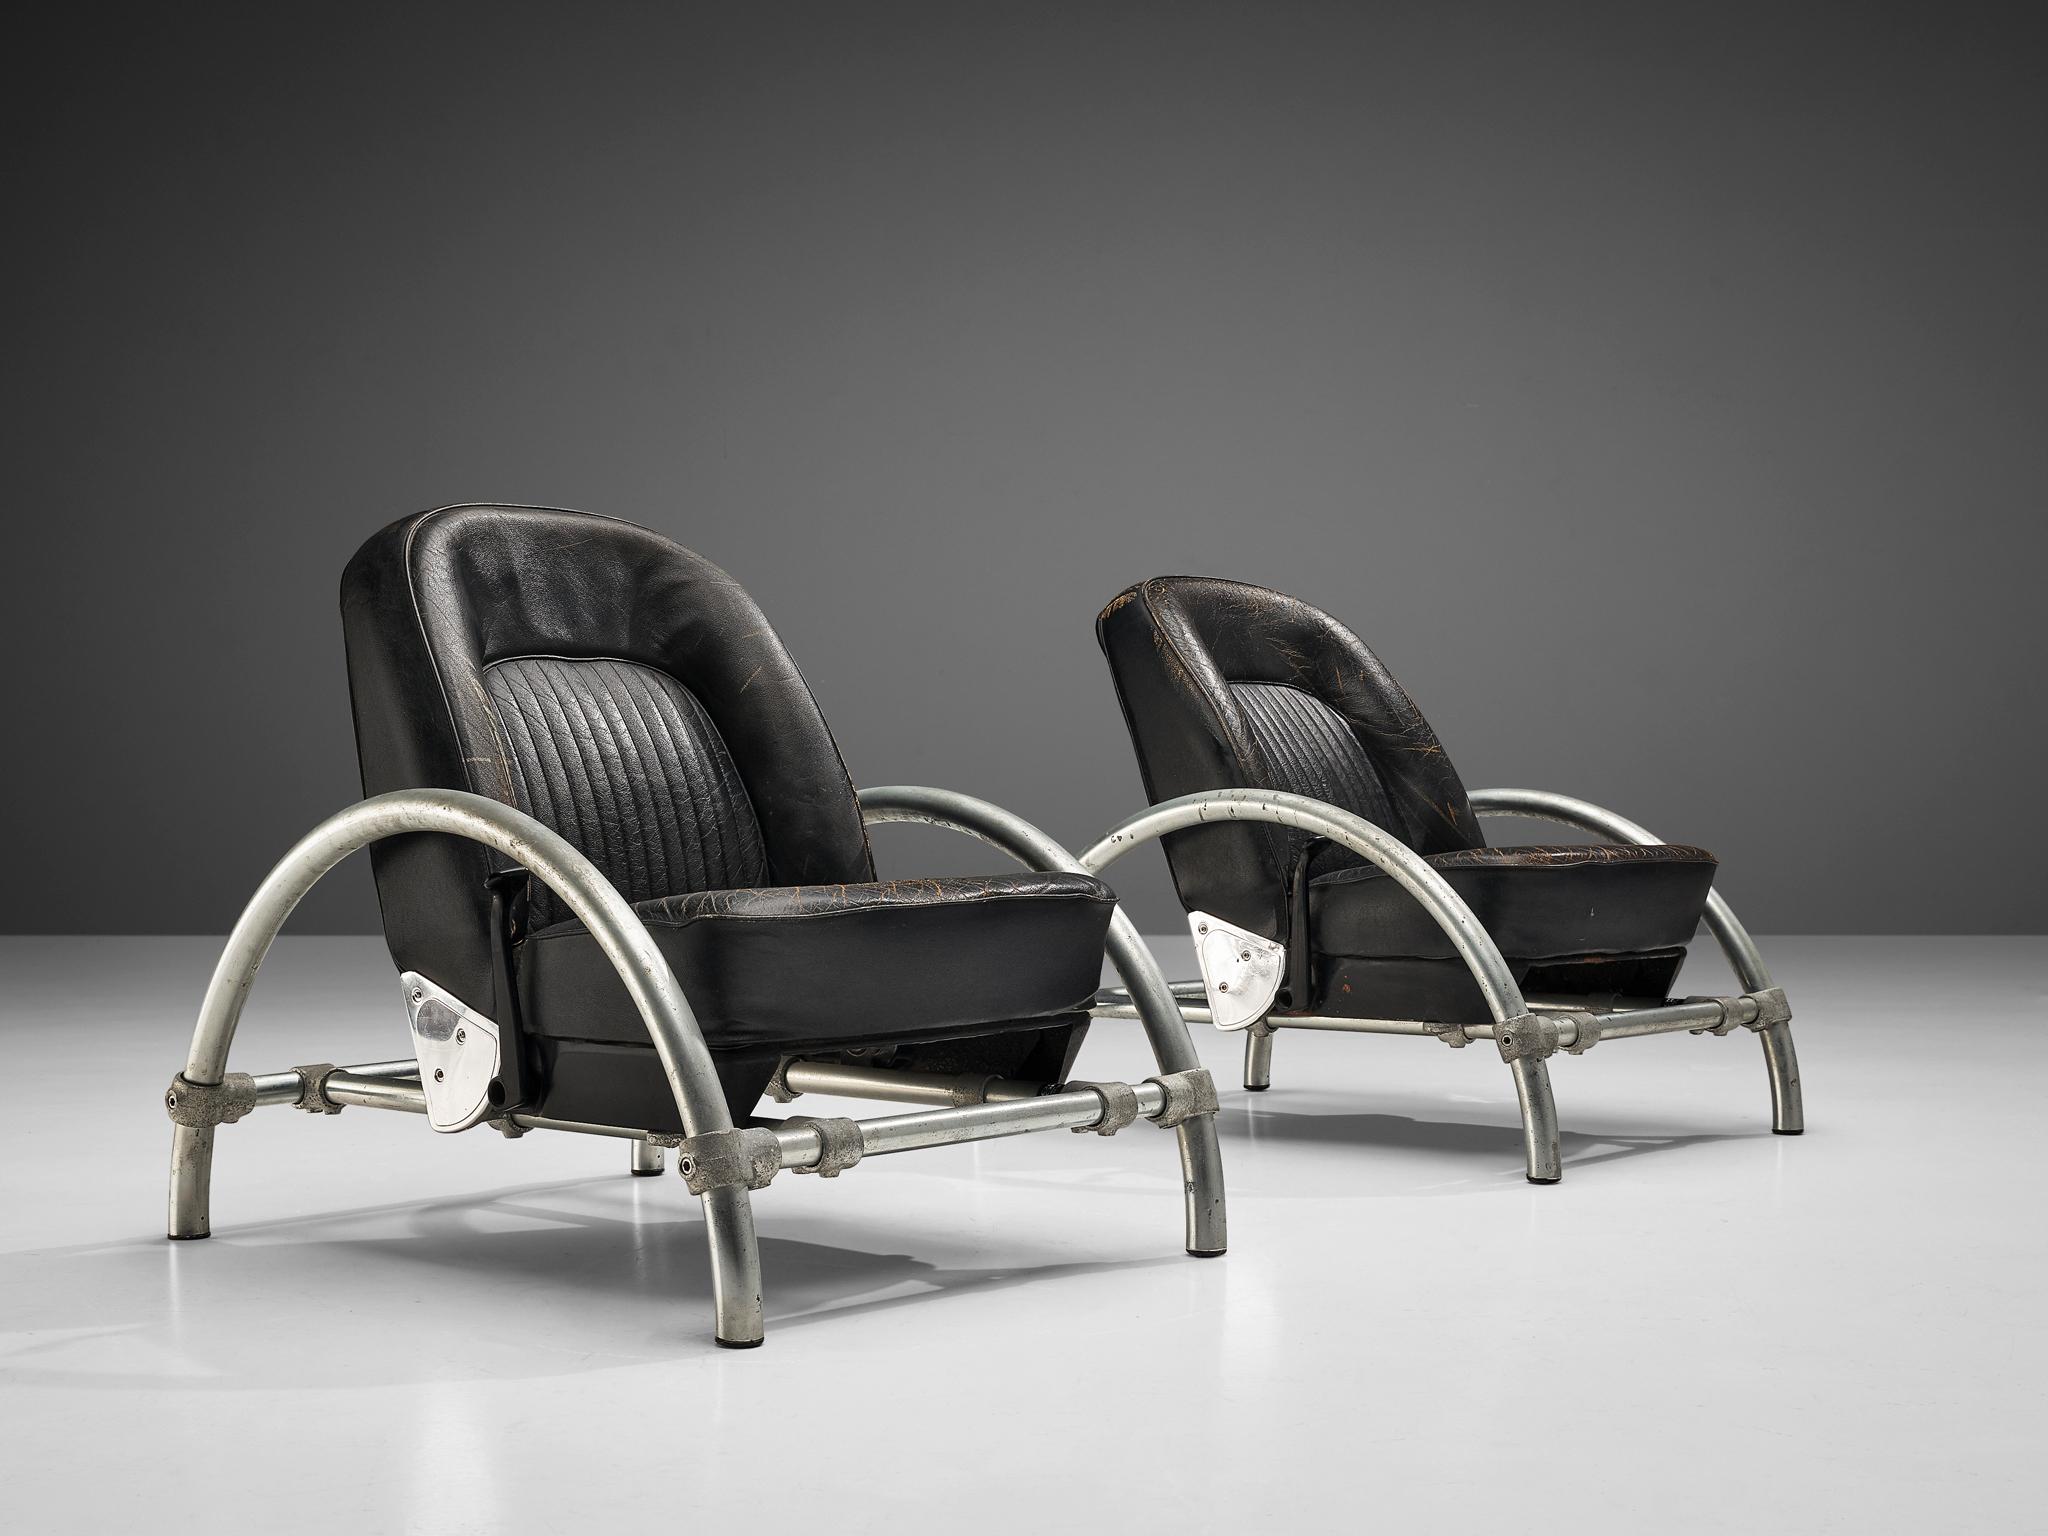 Ron Arad for One Off, lounge chairs model ‘Rover’, steel, iron, leather, United Kingdom, designed in 1981

With the ‘Rover’ chair Israelian born designer Ron Arad successfully started his career. Arad’s first design sold quickly, also to